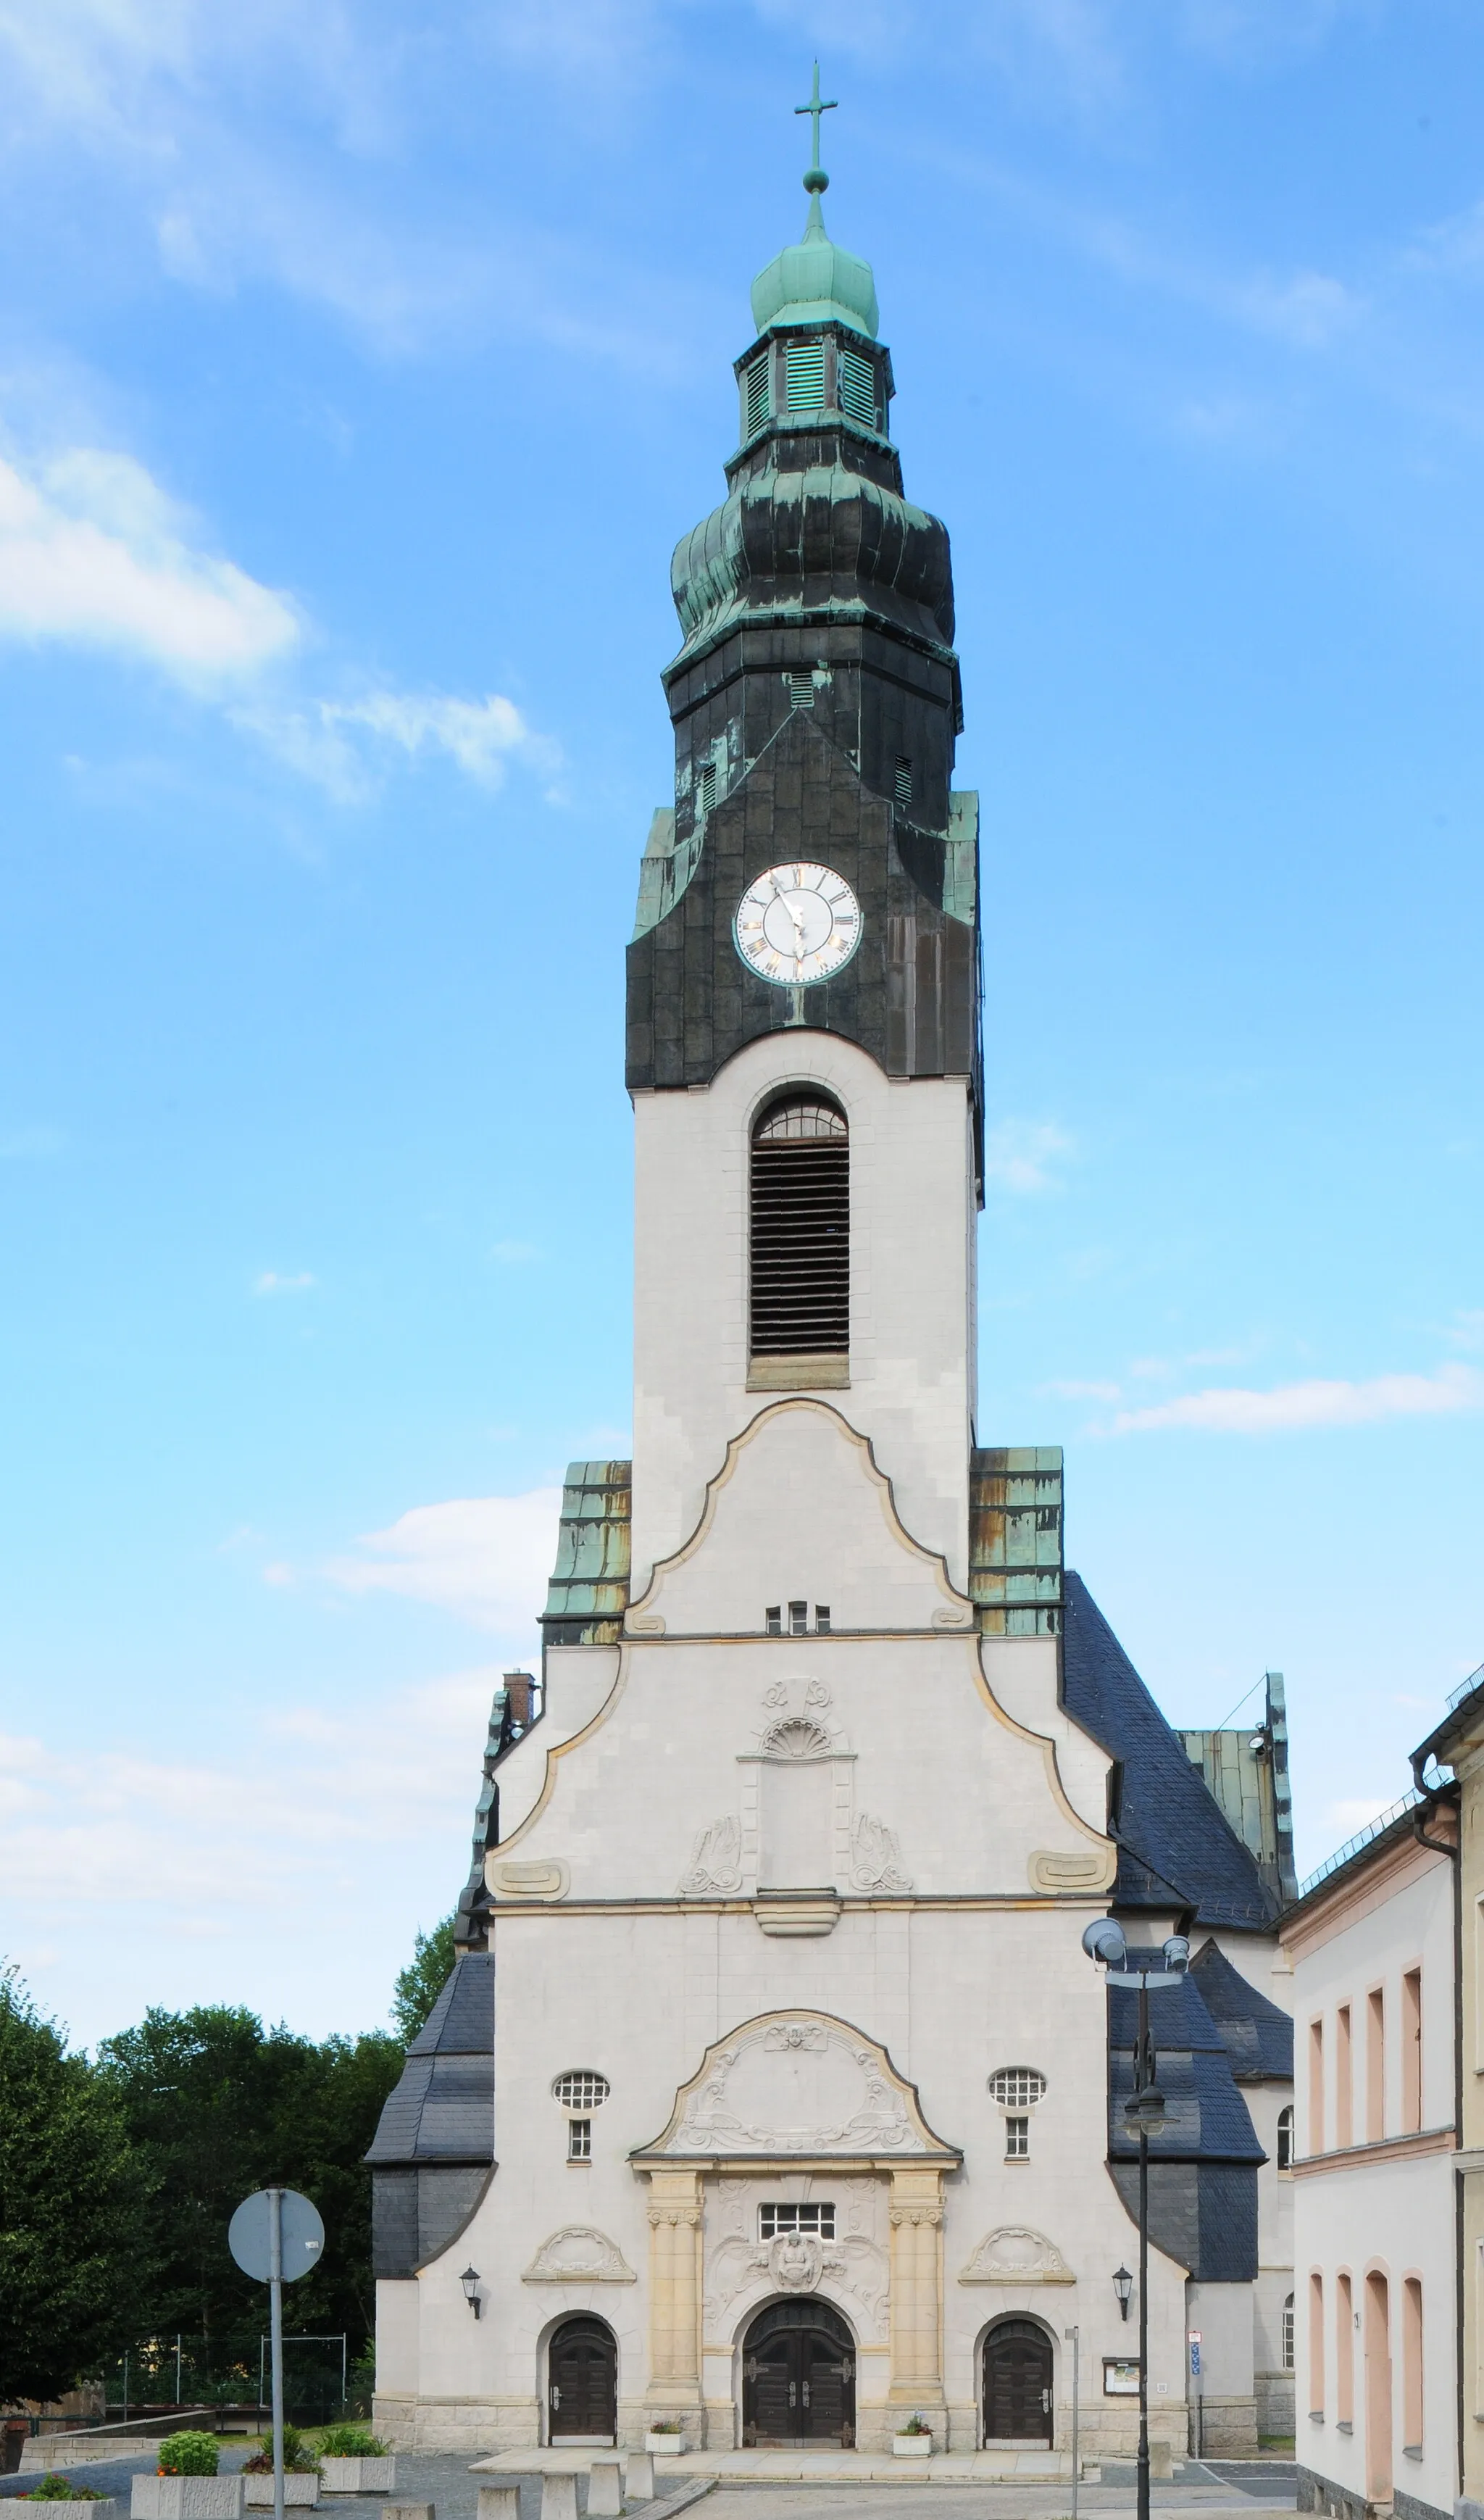 Photo showing: Adorf/Vogtland, Protestant church St Michael (district Vogtlandkreis, Free State of Saxony, Germany)